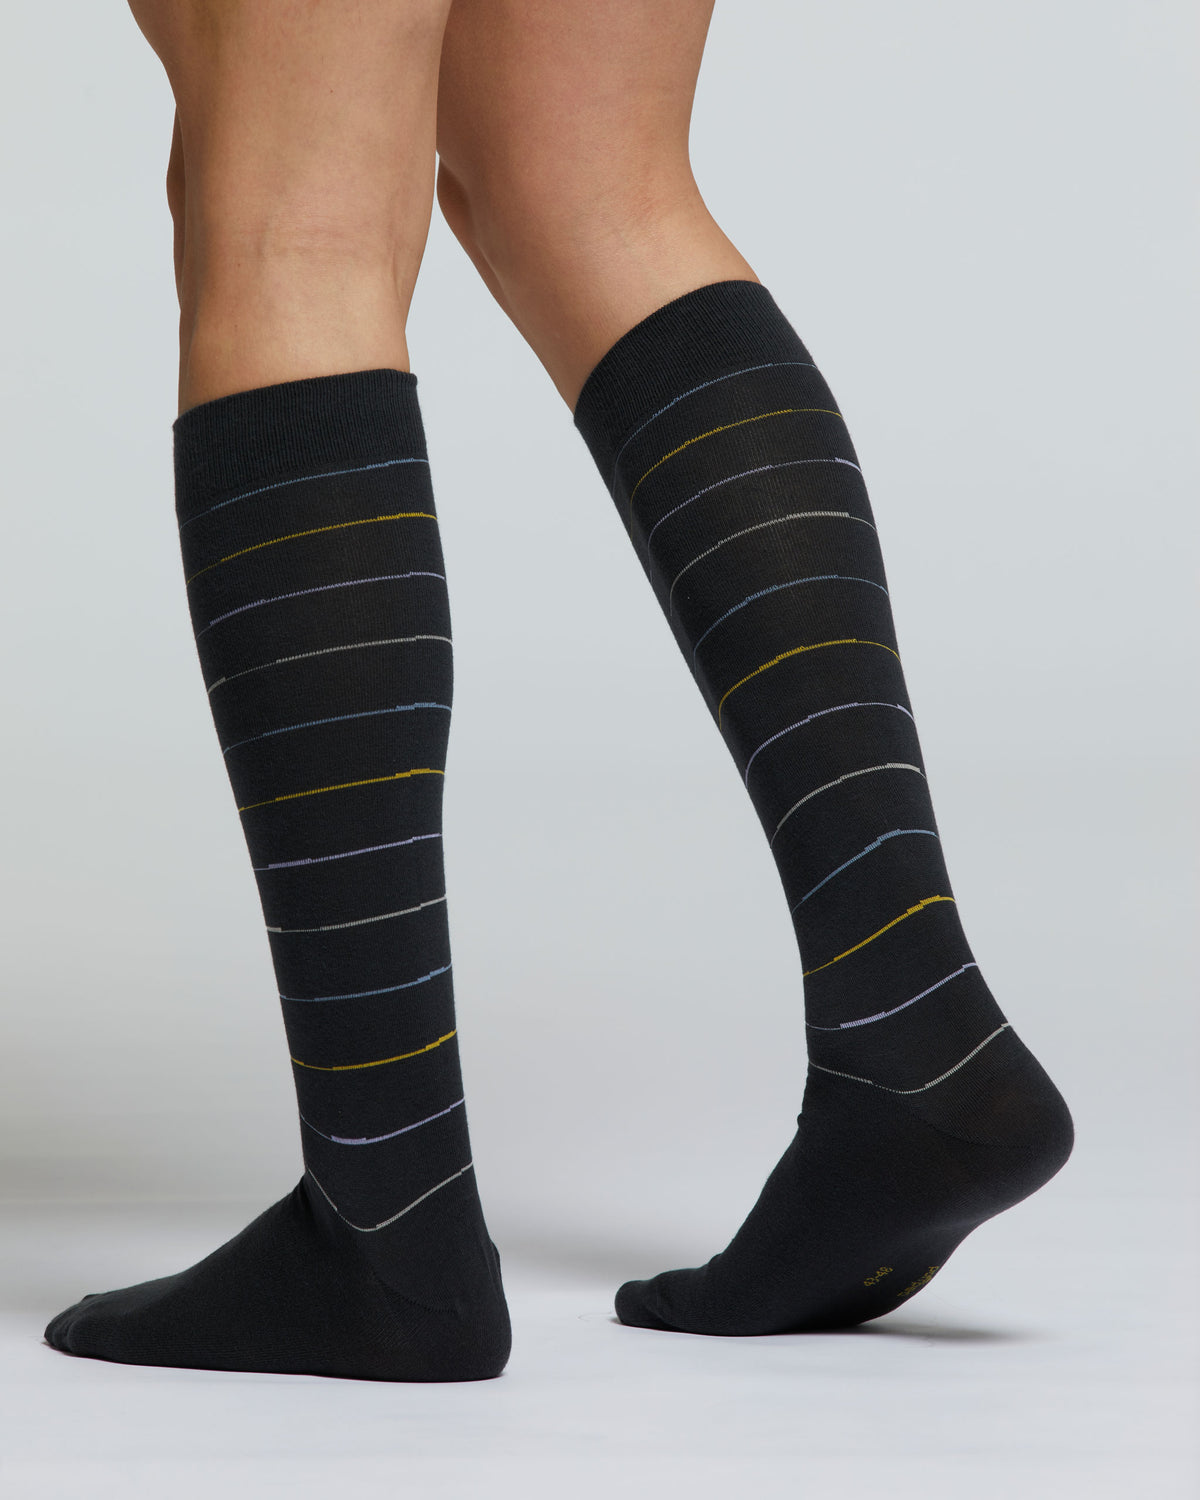 LONG BRUGO COTTON SOCK WITH STRIPE PATTERN